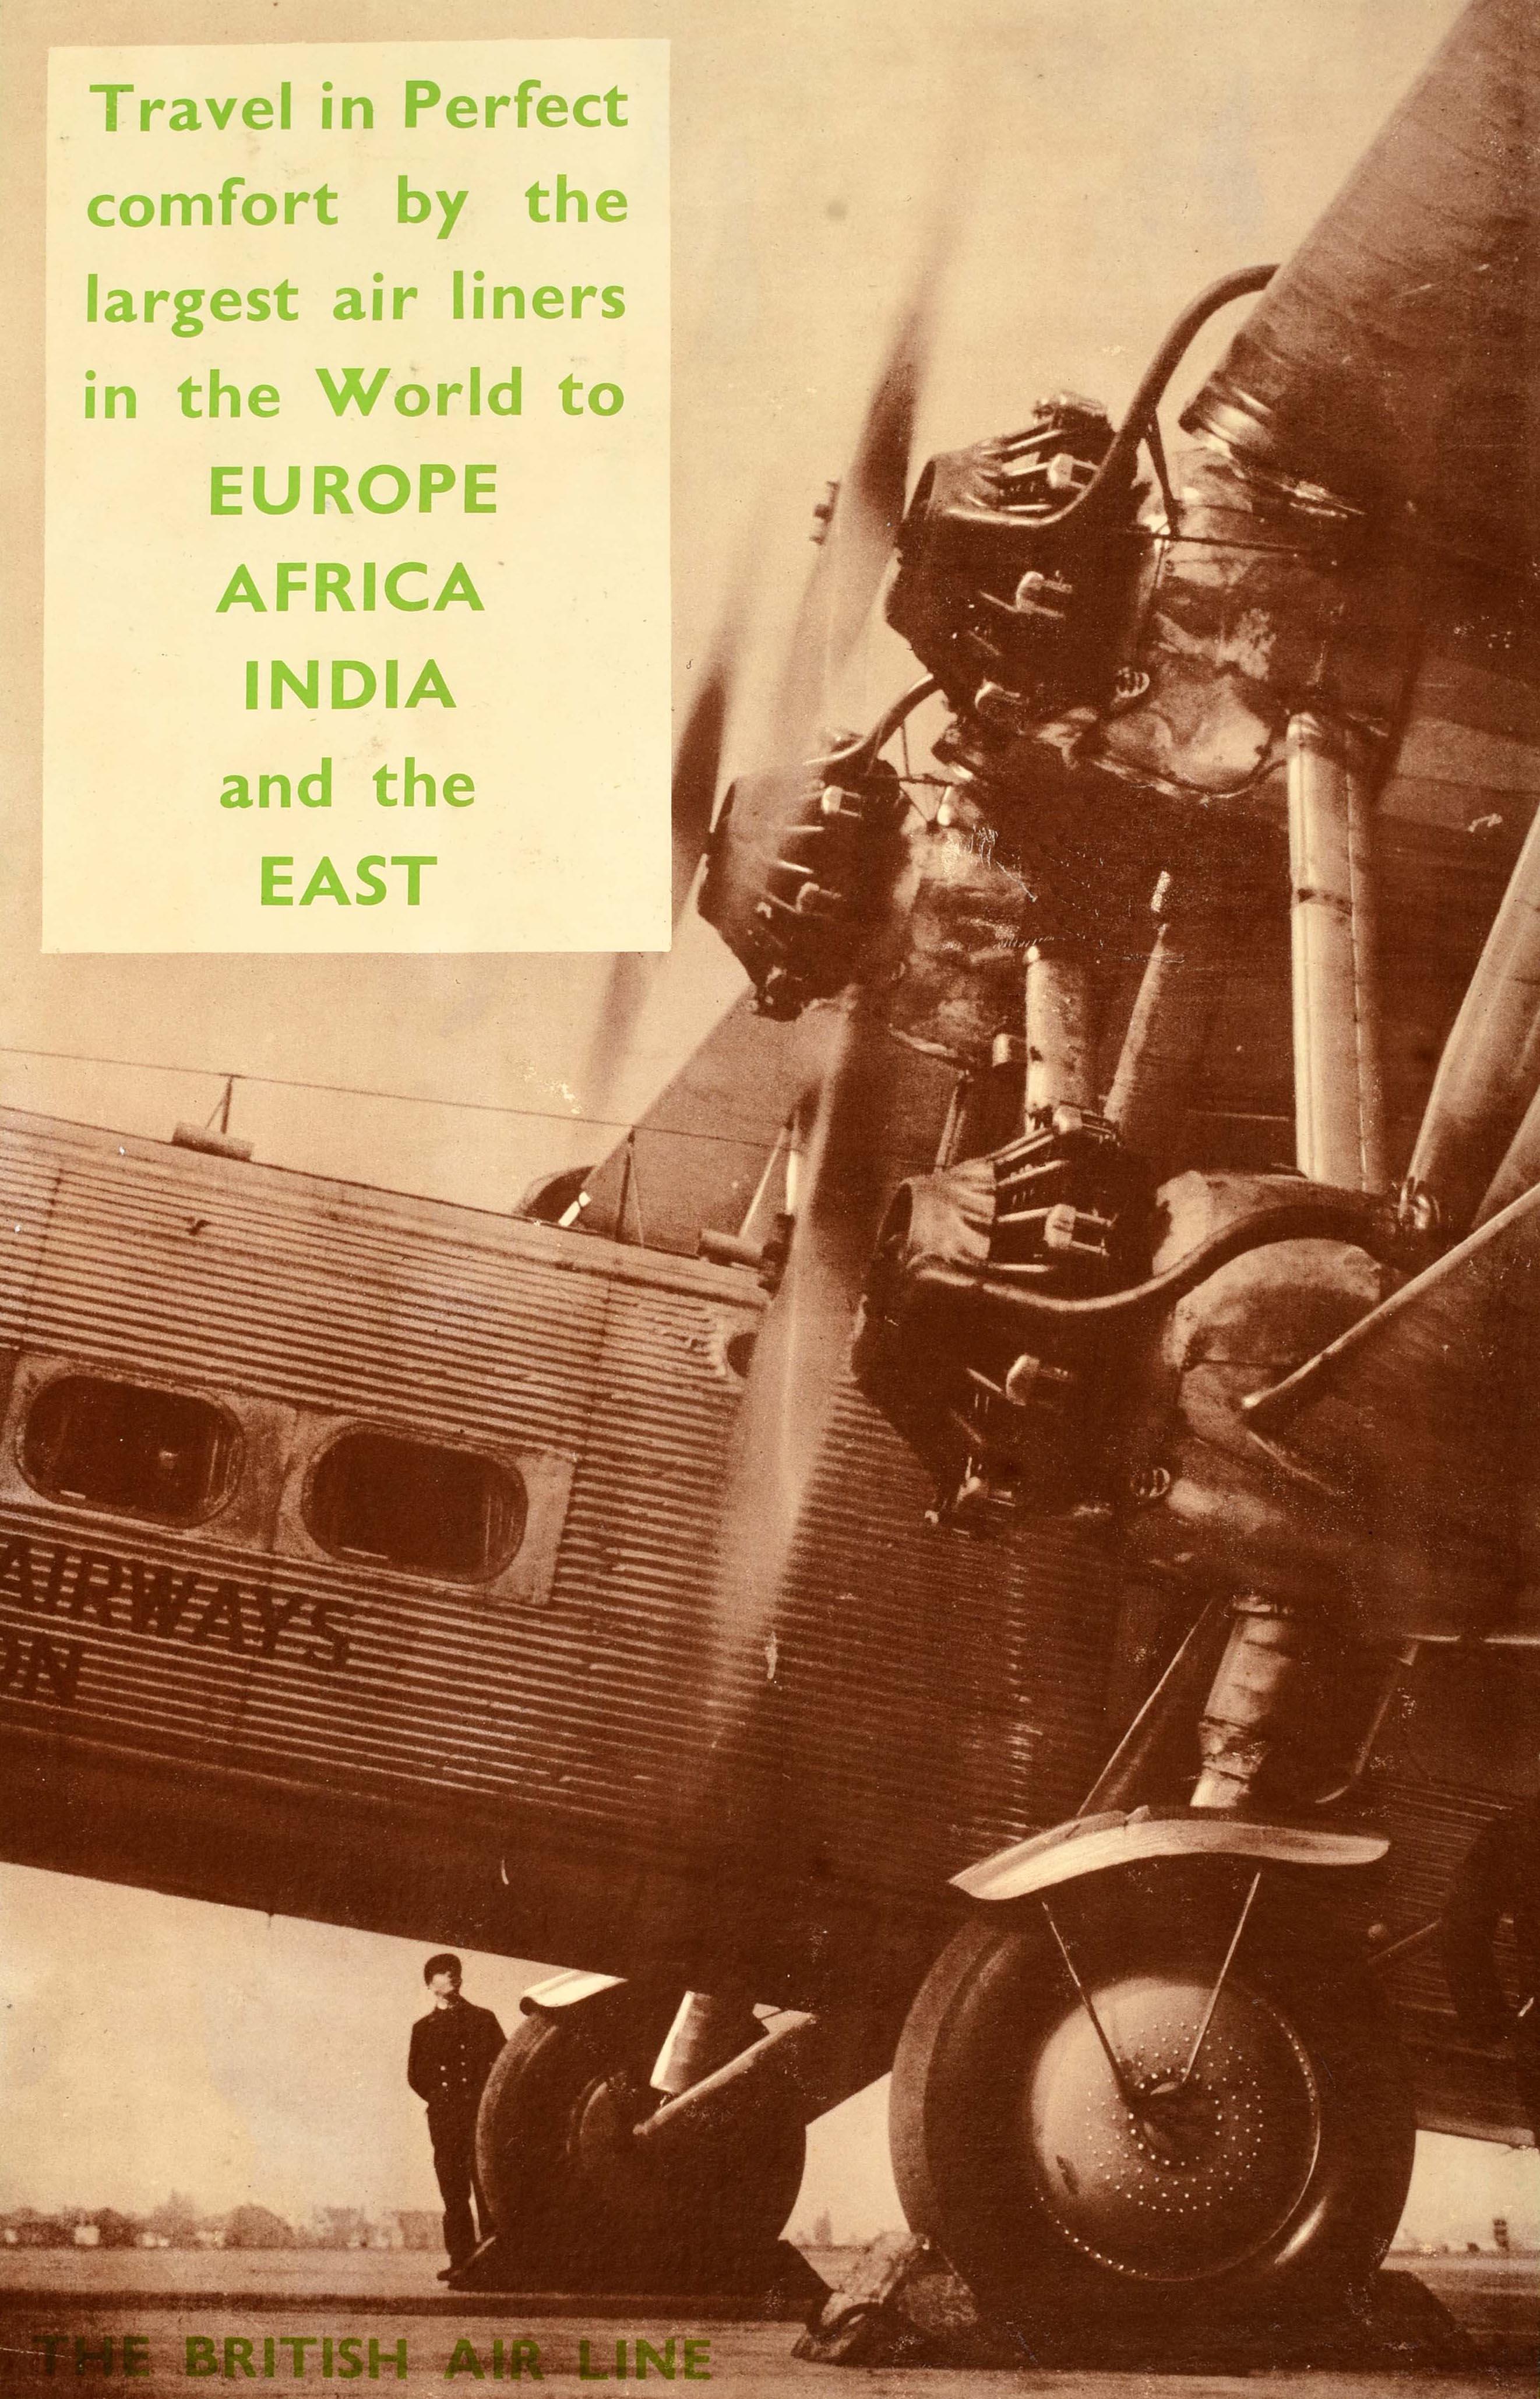 Original vintage travel advertising poster - Imperial Airways The British Air Line Travel in perfect comfort by the largest air liners in the World to Europe Africa India and the East - featuring a sepia-toned photograph of a man in uniform standing